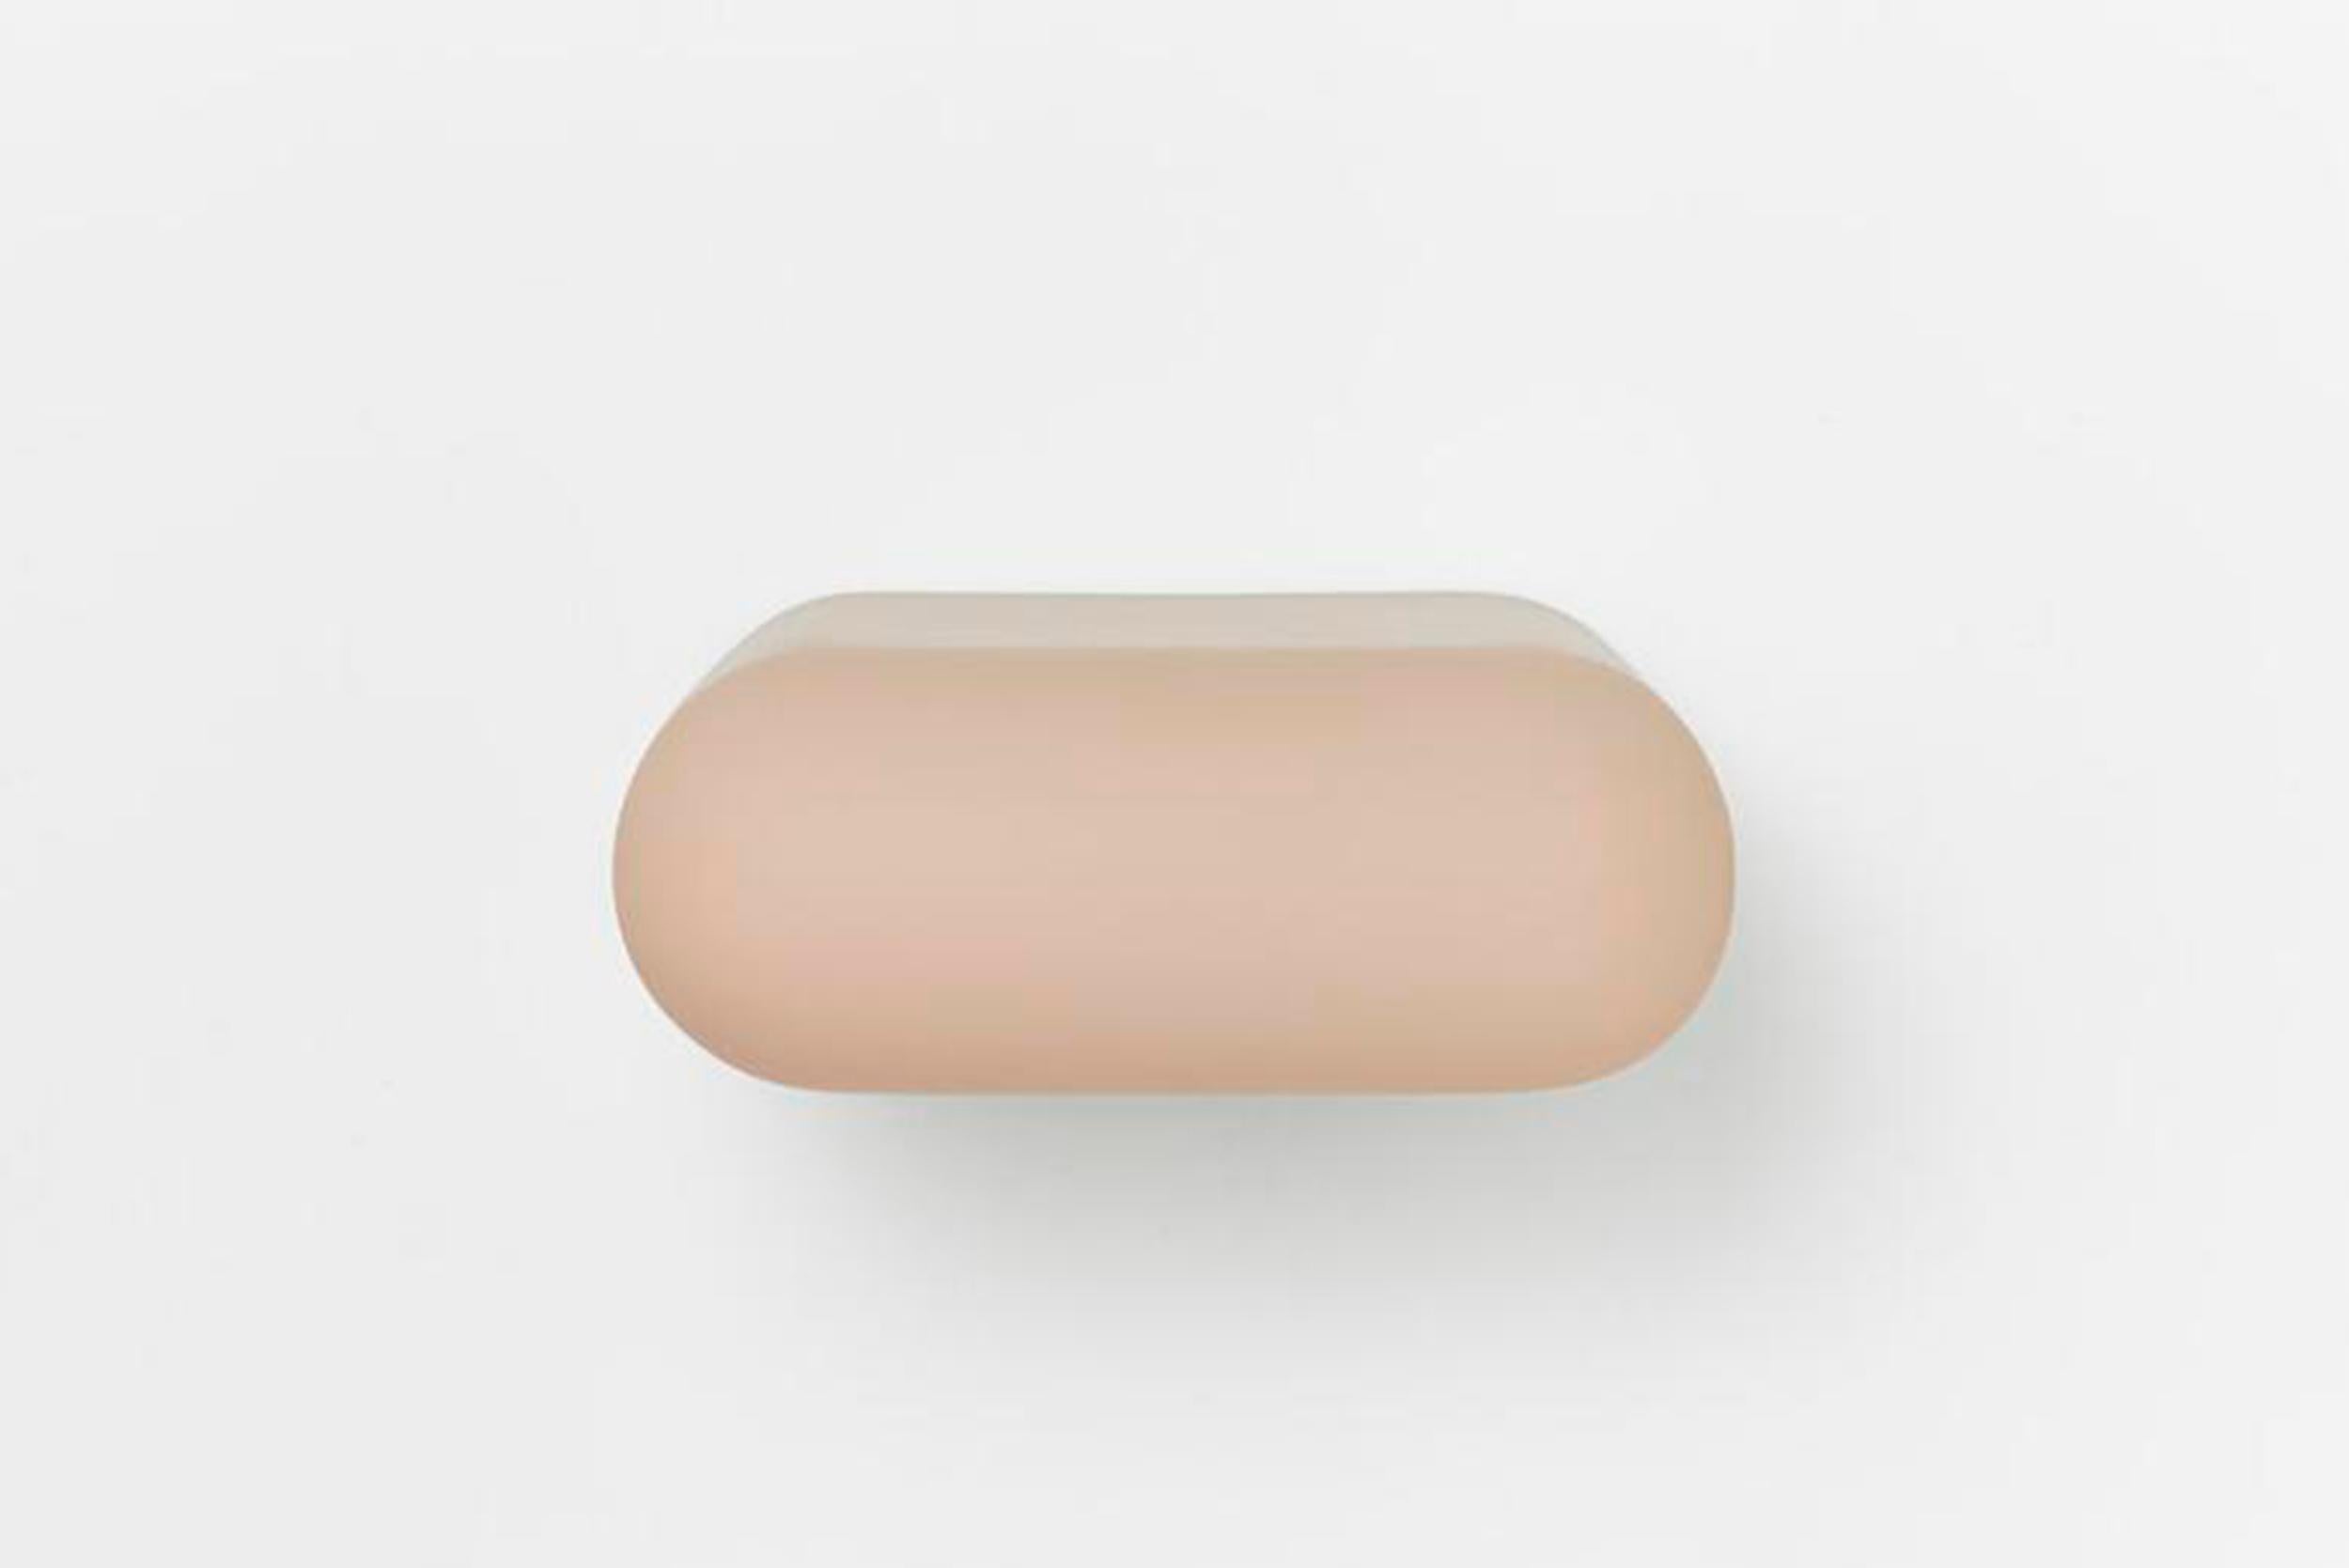 Faye Toogood, Roly Poly Cantilever Drawer, London, 2019 Wood, Soft Touch Lacquer In New Condition For Sale In Barcelona, ES